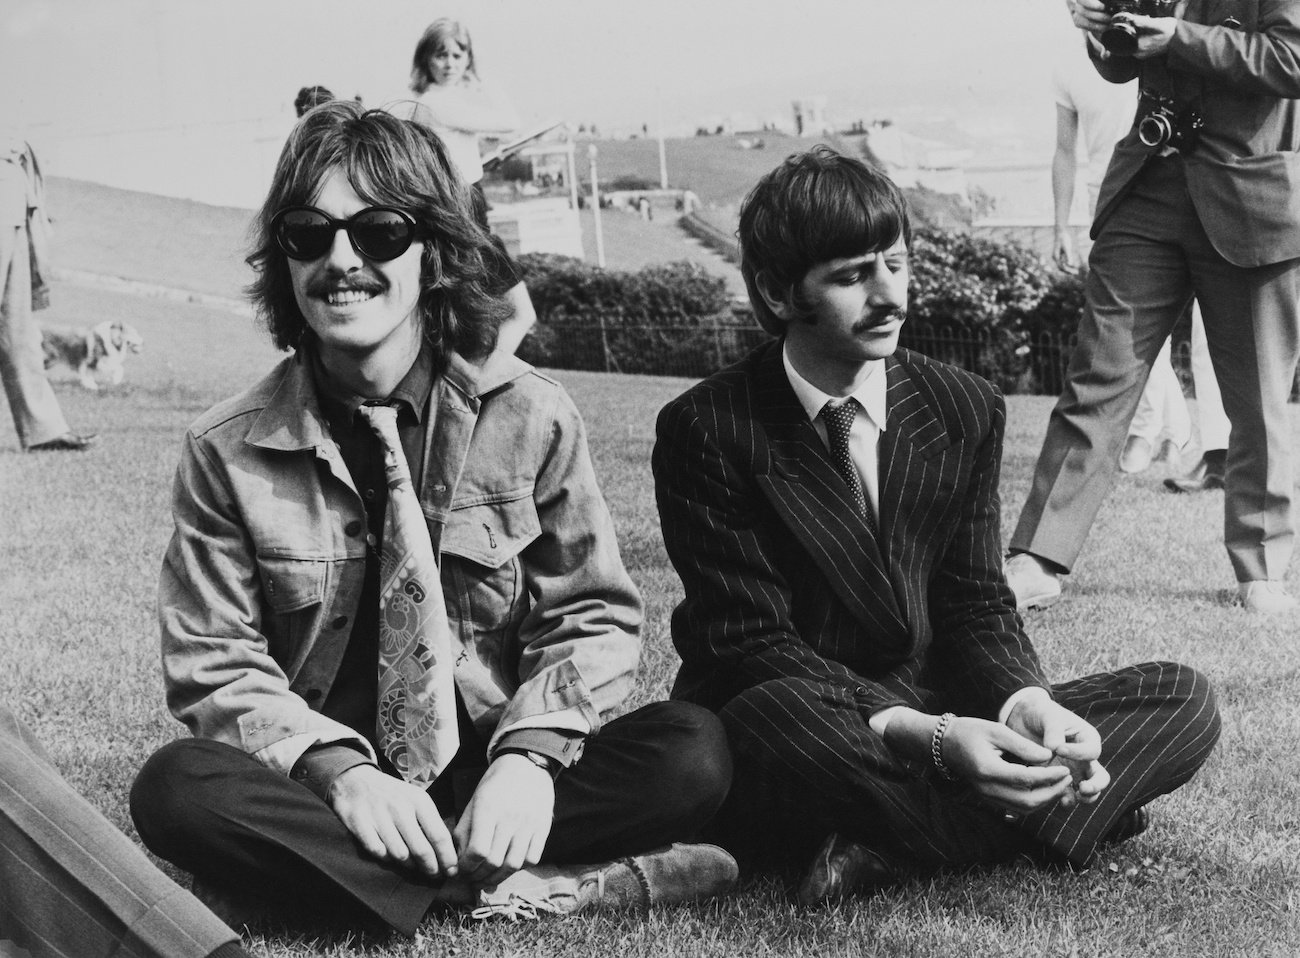 George Harrison with Ringo Starr during the filming of 'Magical Mystery Tour' in 1967.